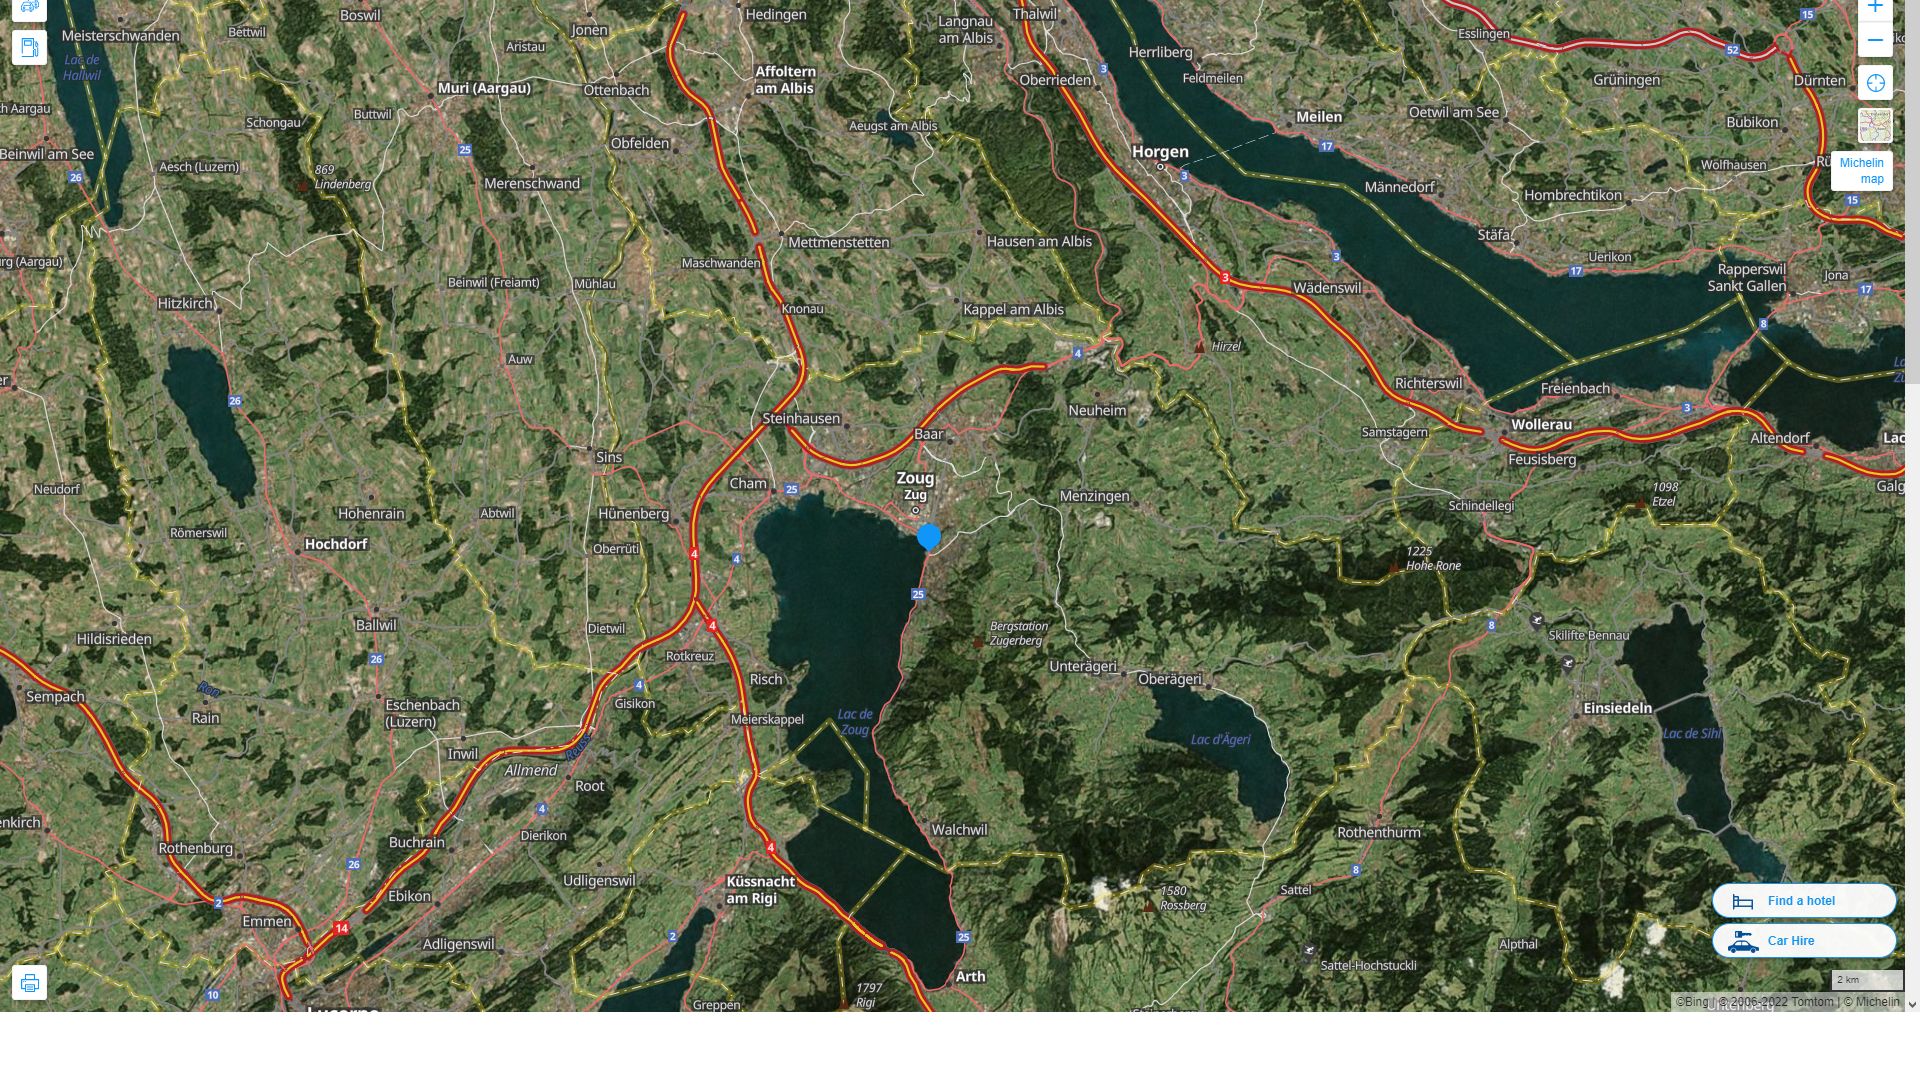 Zug Highway and Road Map with Satellite View